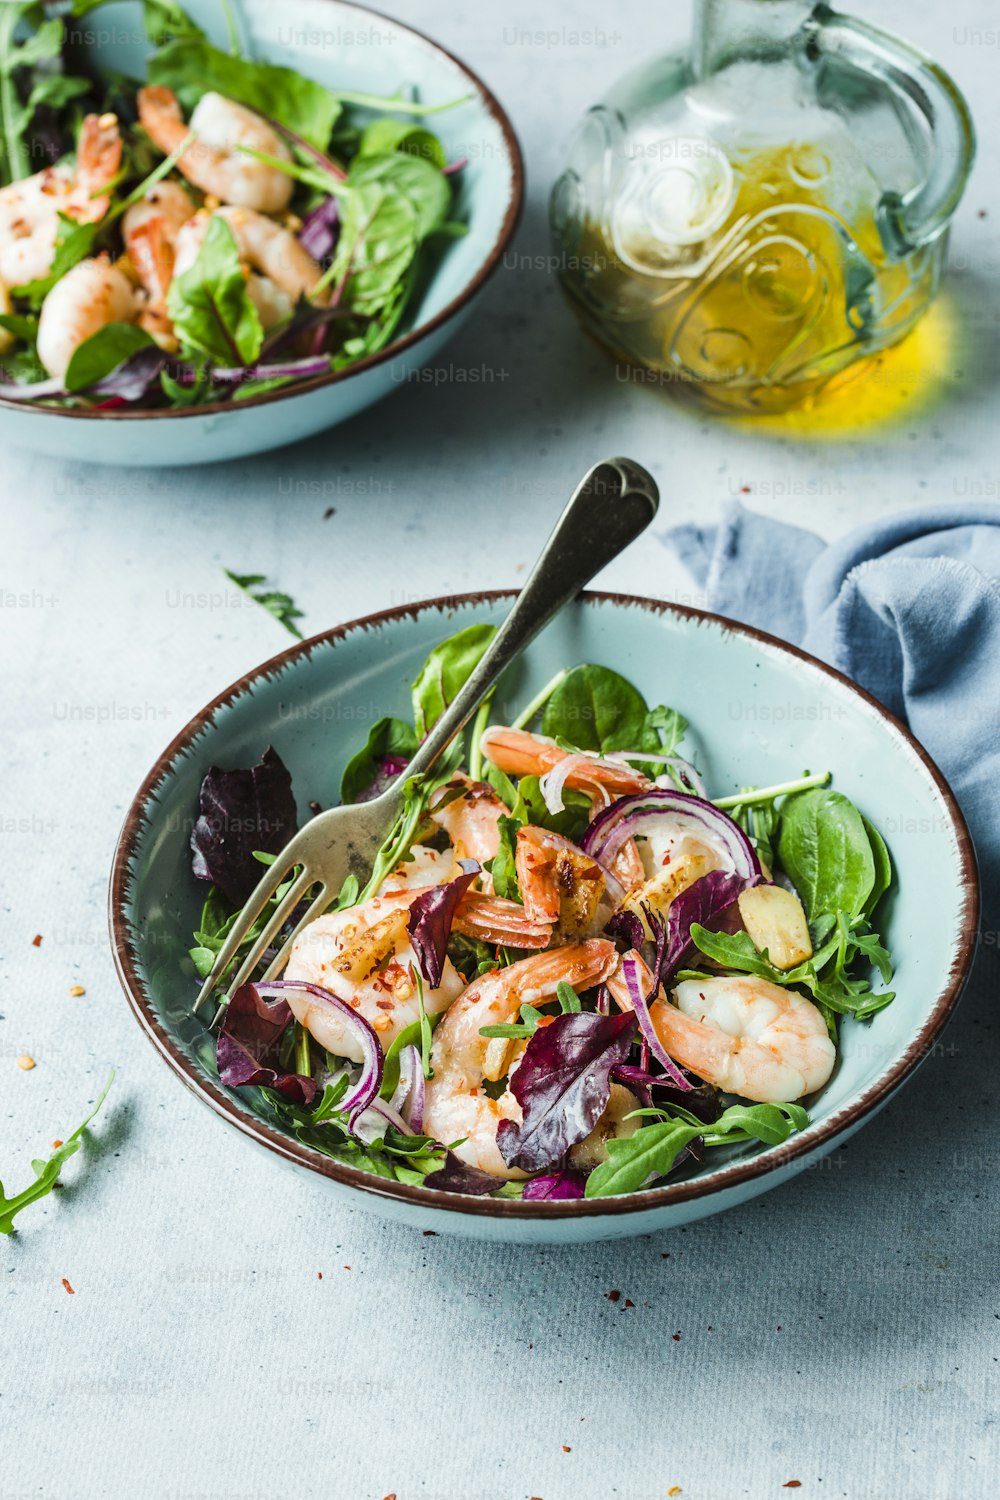 two bowls of salad with shrimp and greens